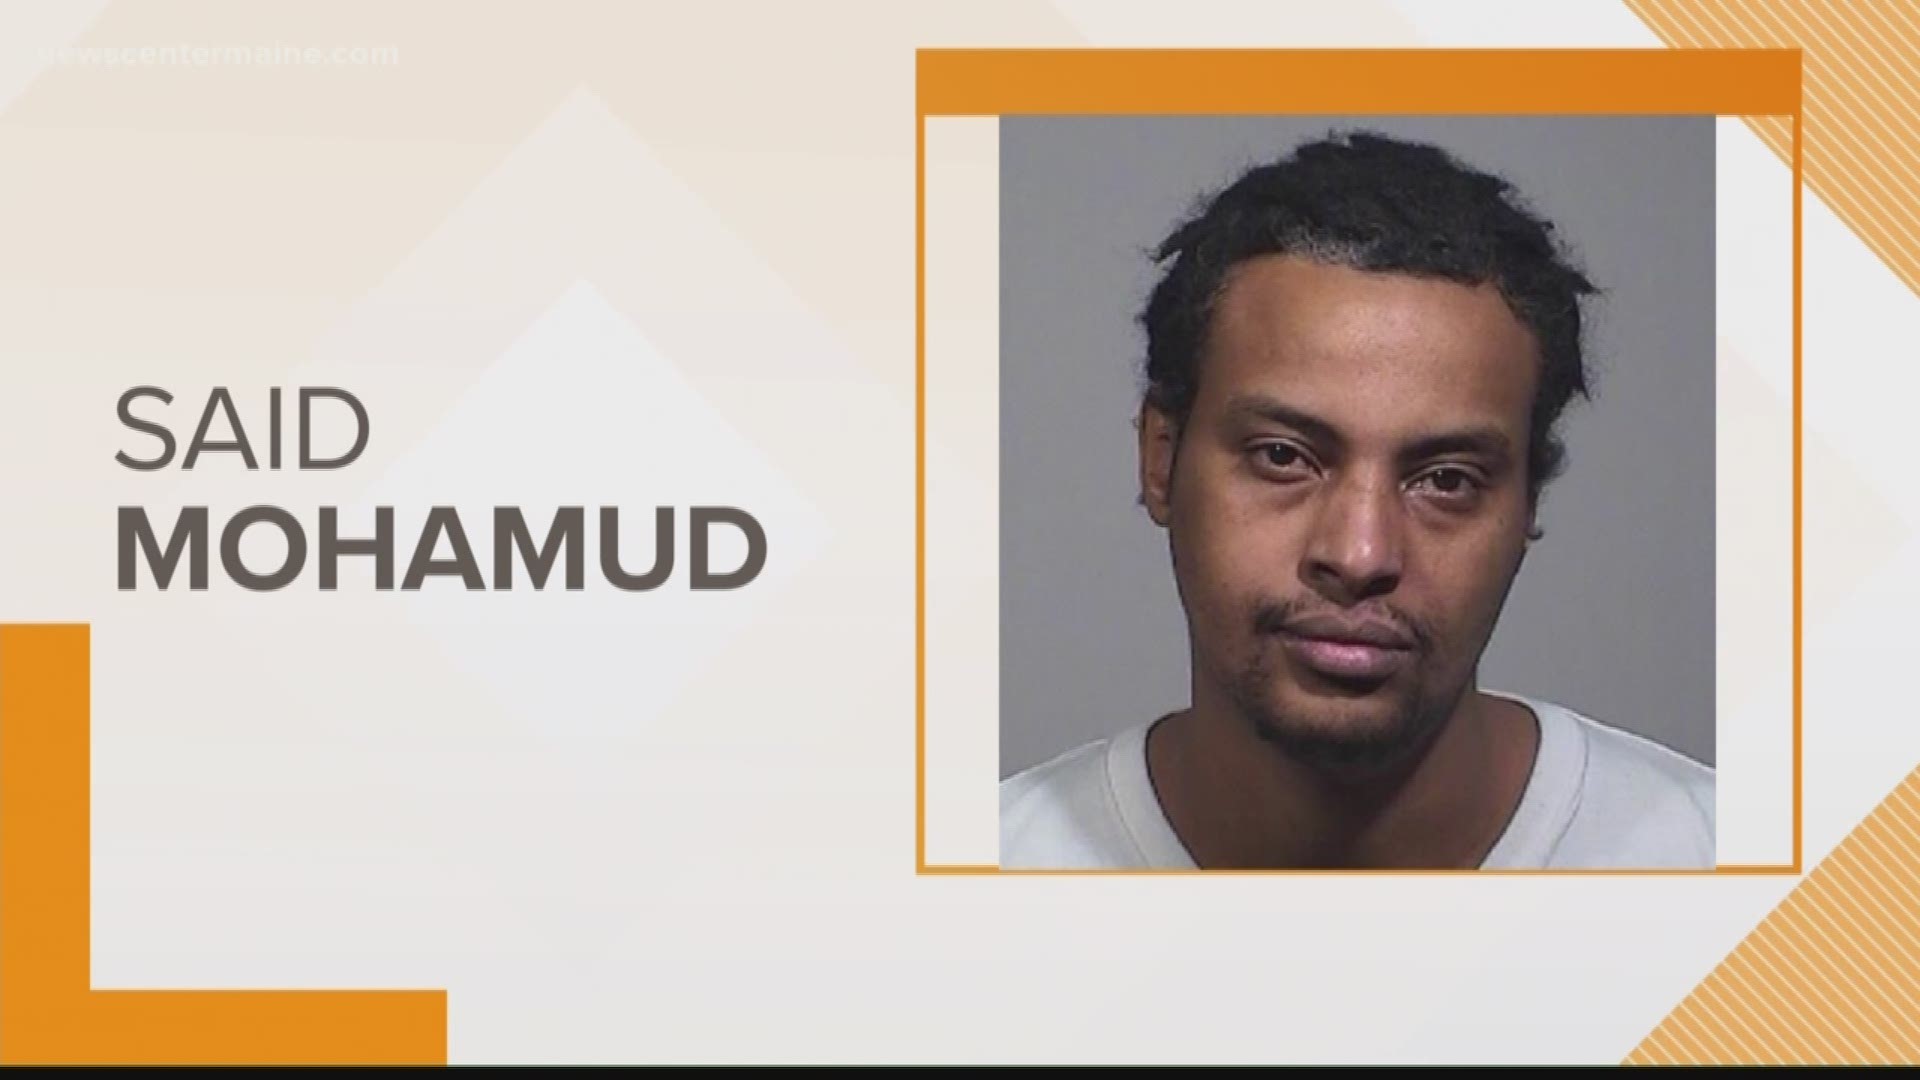 Westbrook Police are looking for Said Mohamud, who is wanted in connection with a stabbing on Cumberland Street last Friday.